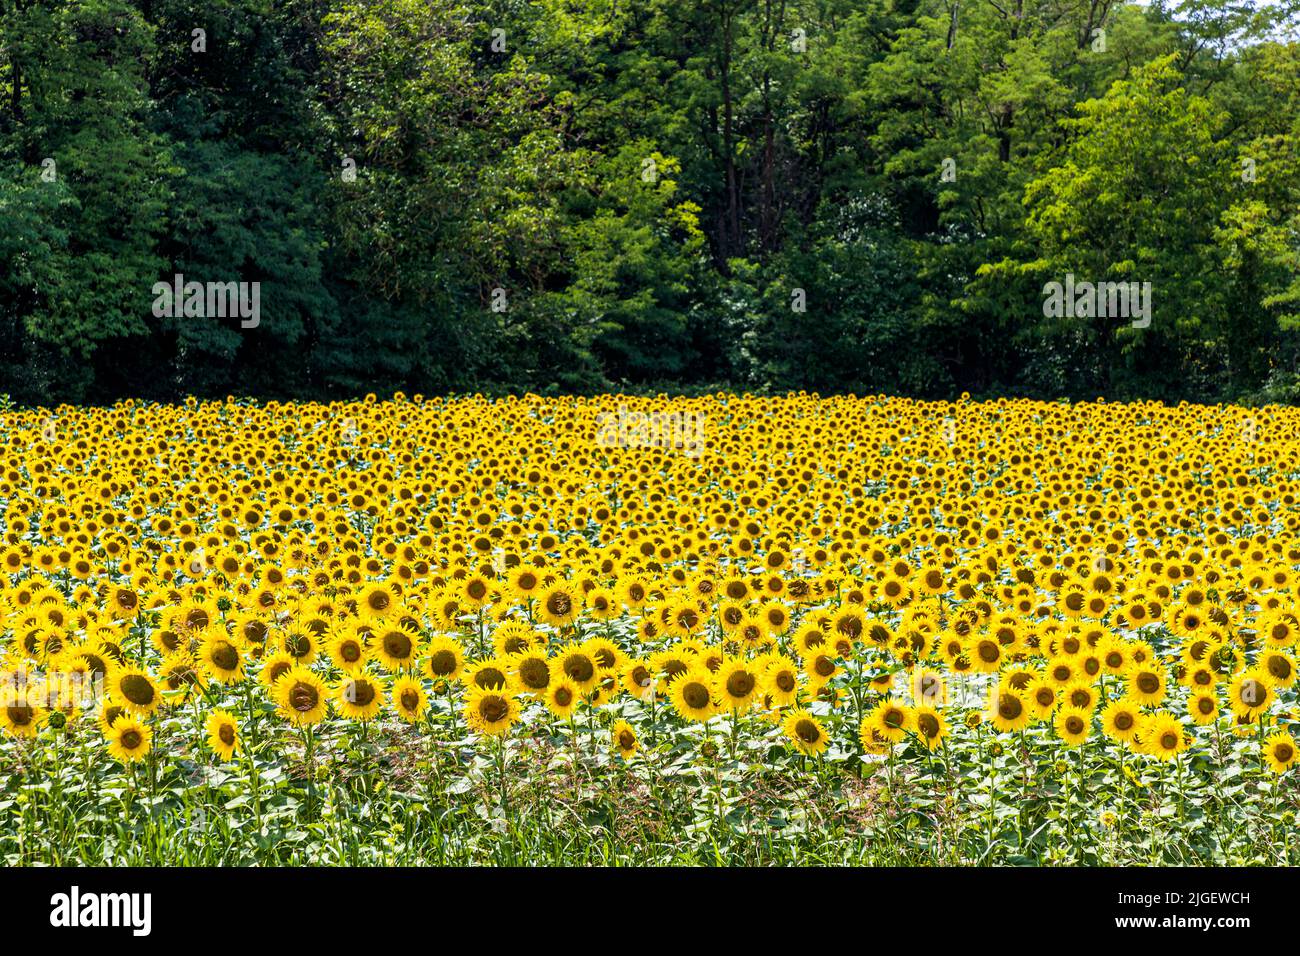 A field full of sunflowers Stock Photo